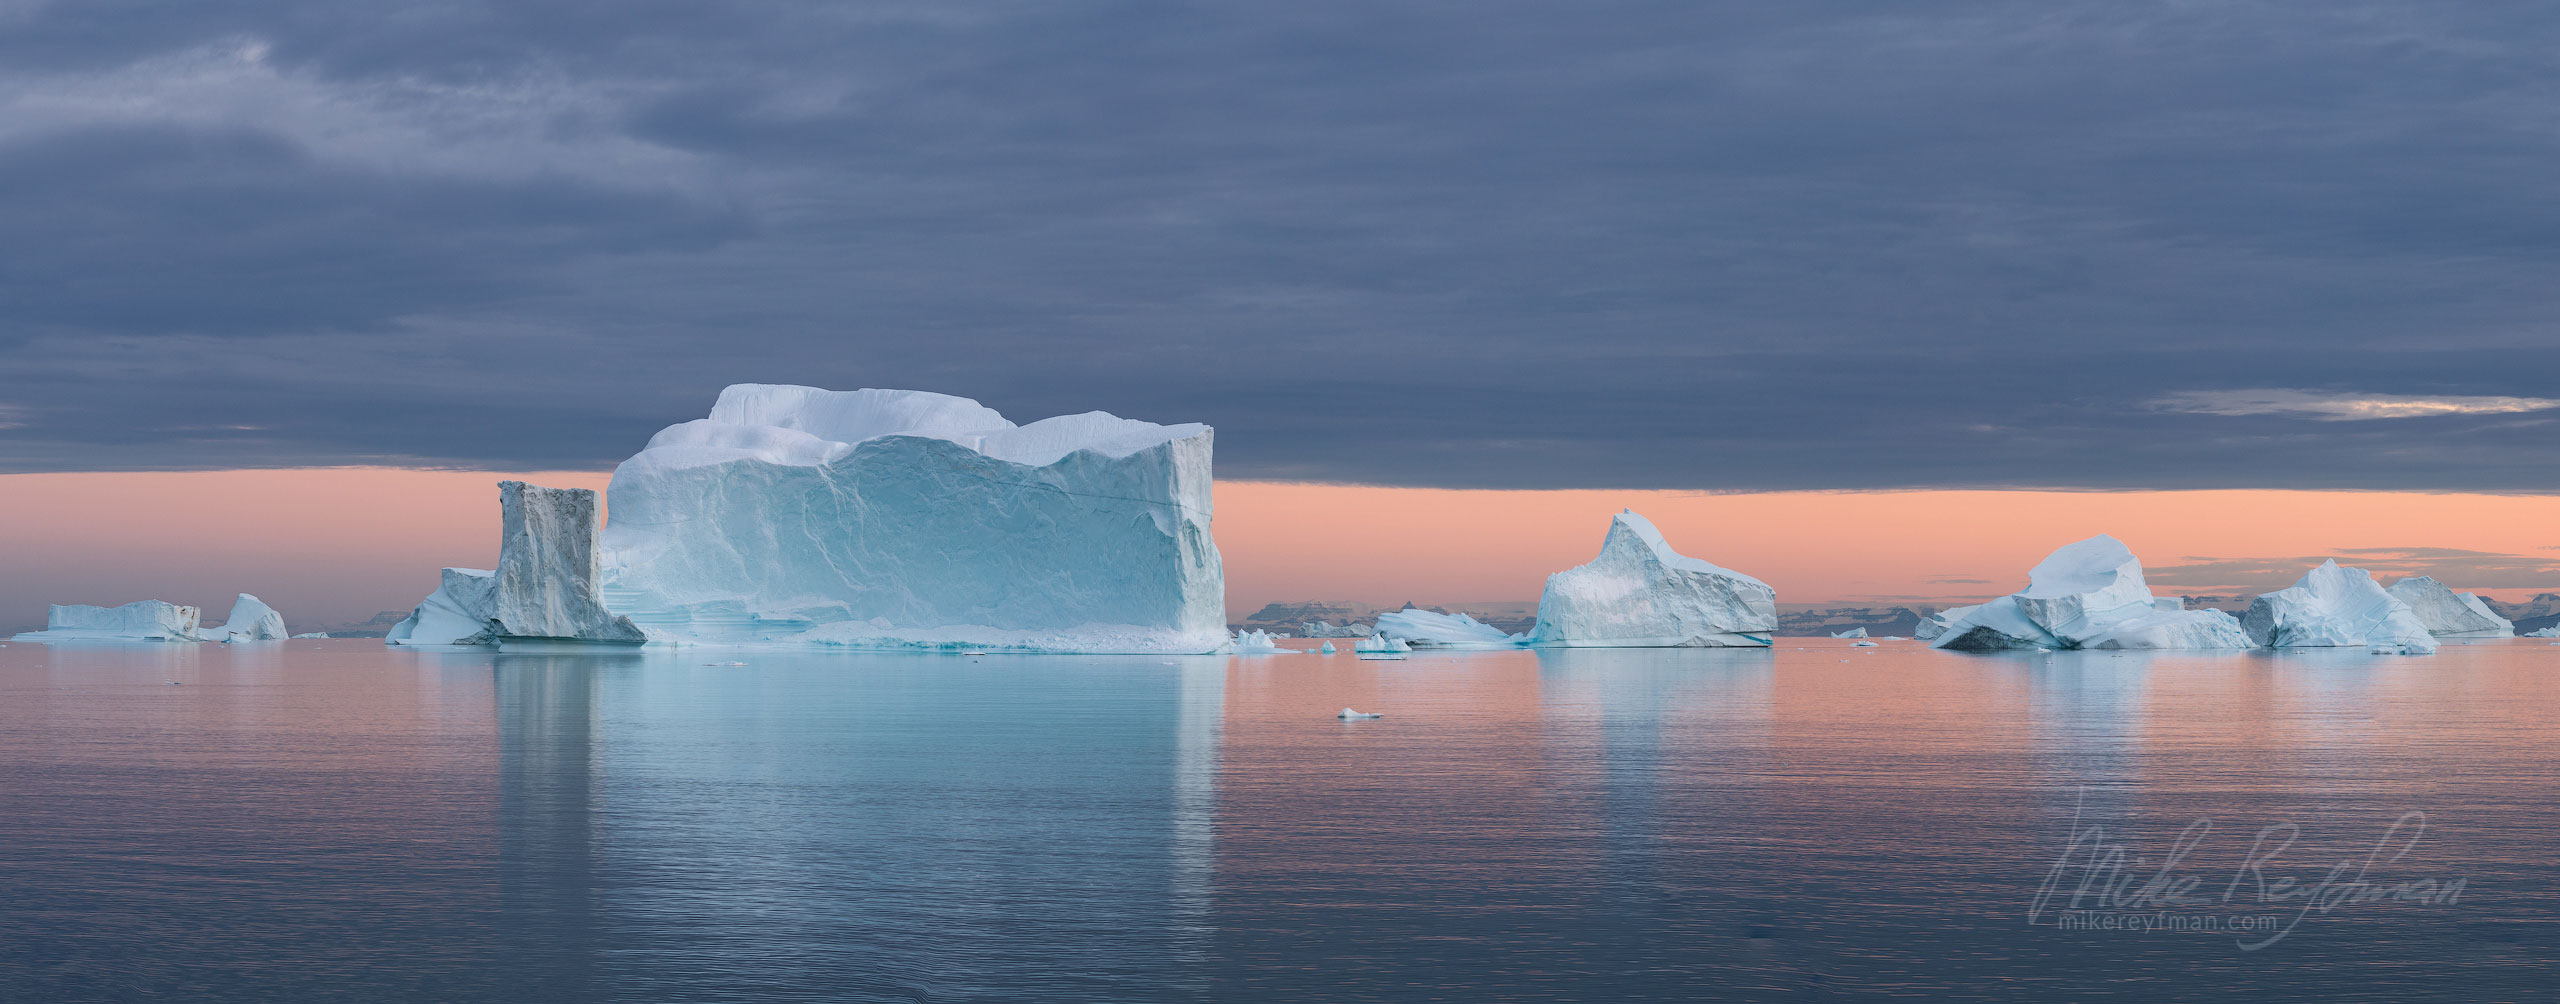 Icebergs in Scoresby Sund. Greenland. 078-GR-SC_50B7309_Pano-1x2.55 - The Scoresby Sund fjord system and the settlement of Ittoqqortoormiit. East Greenland. - Mike Reyfman Photography